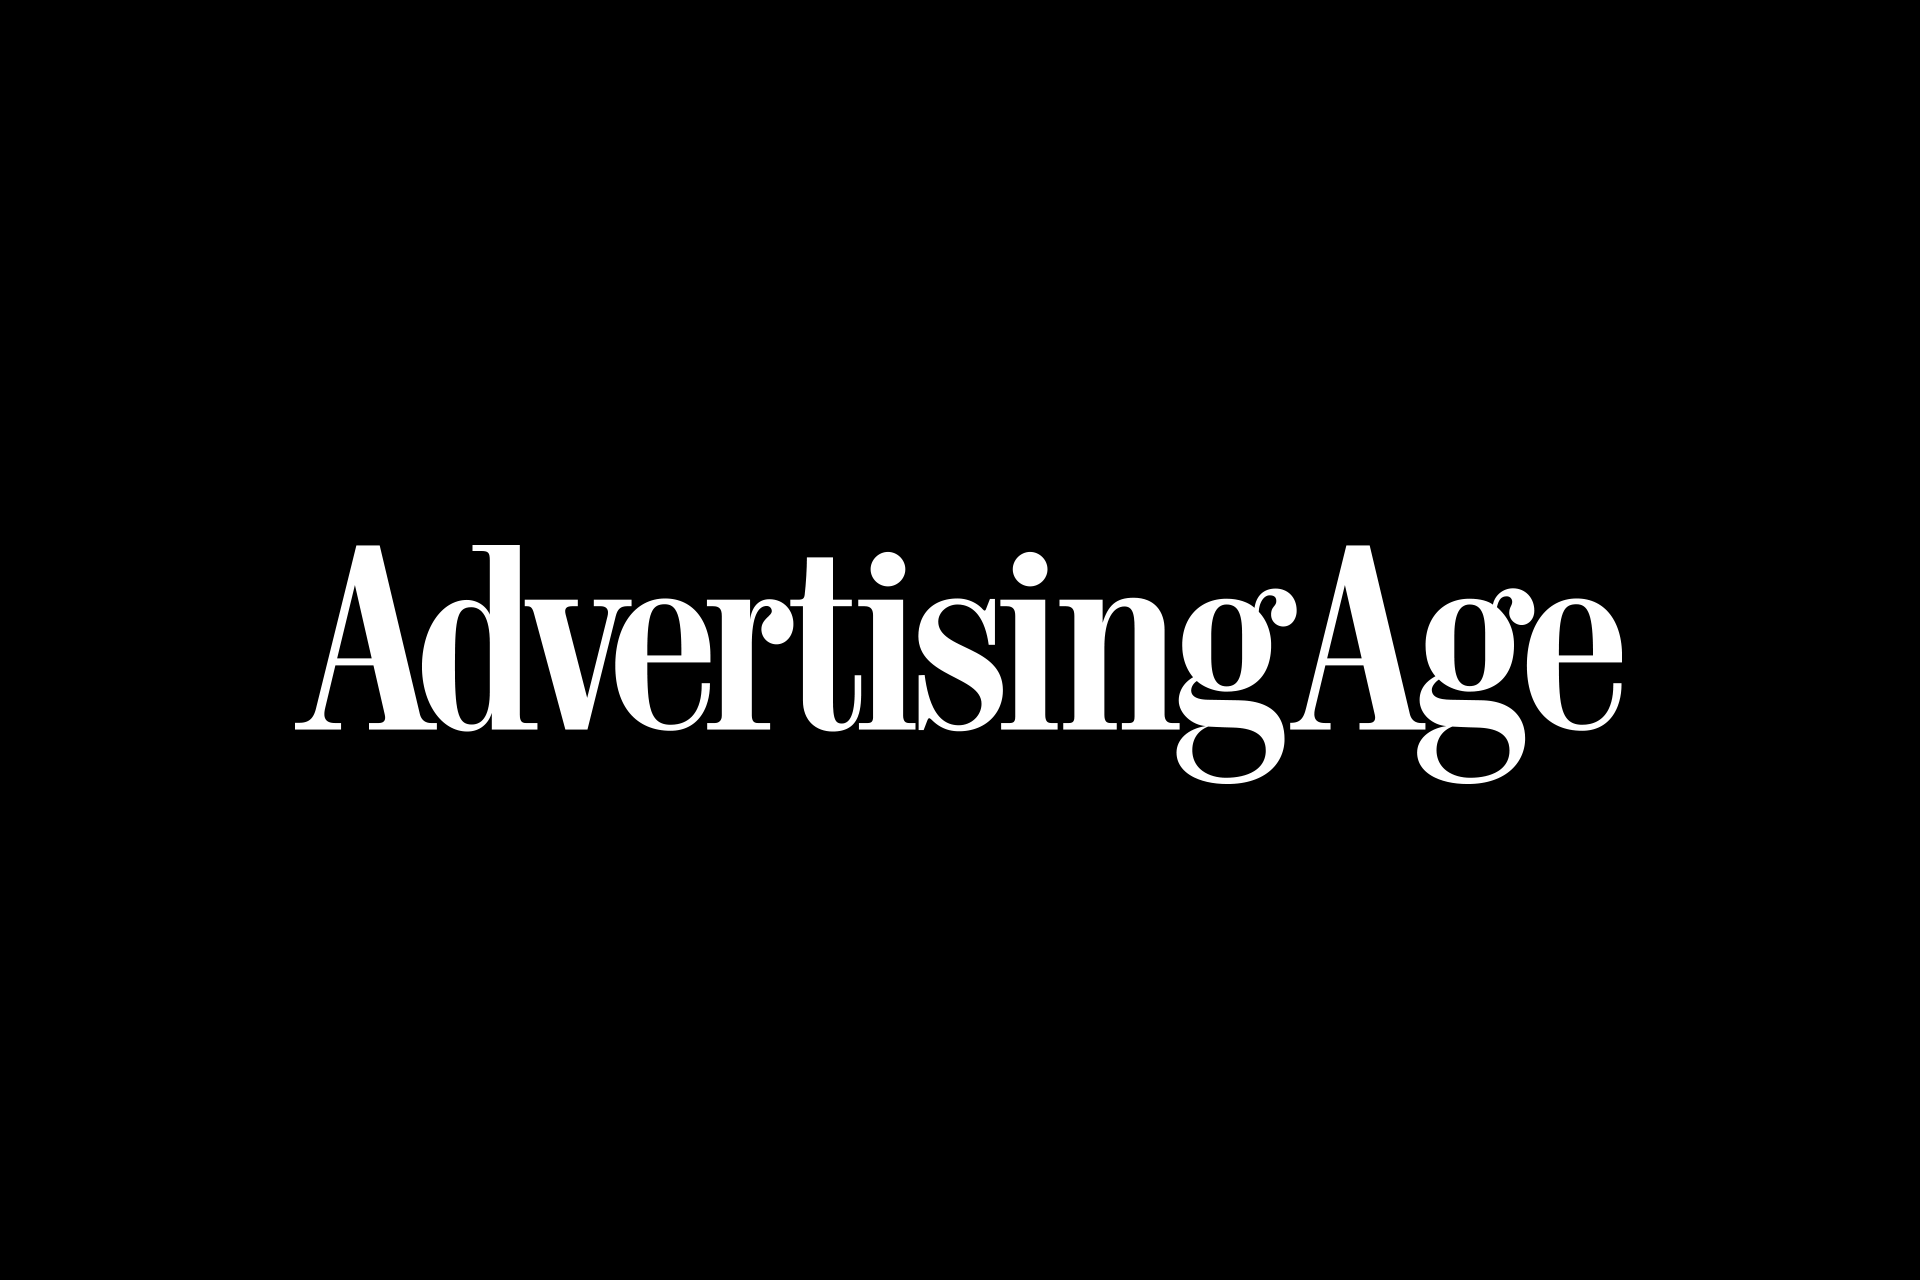 Important to Important People: Ad Age Revamps New Look